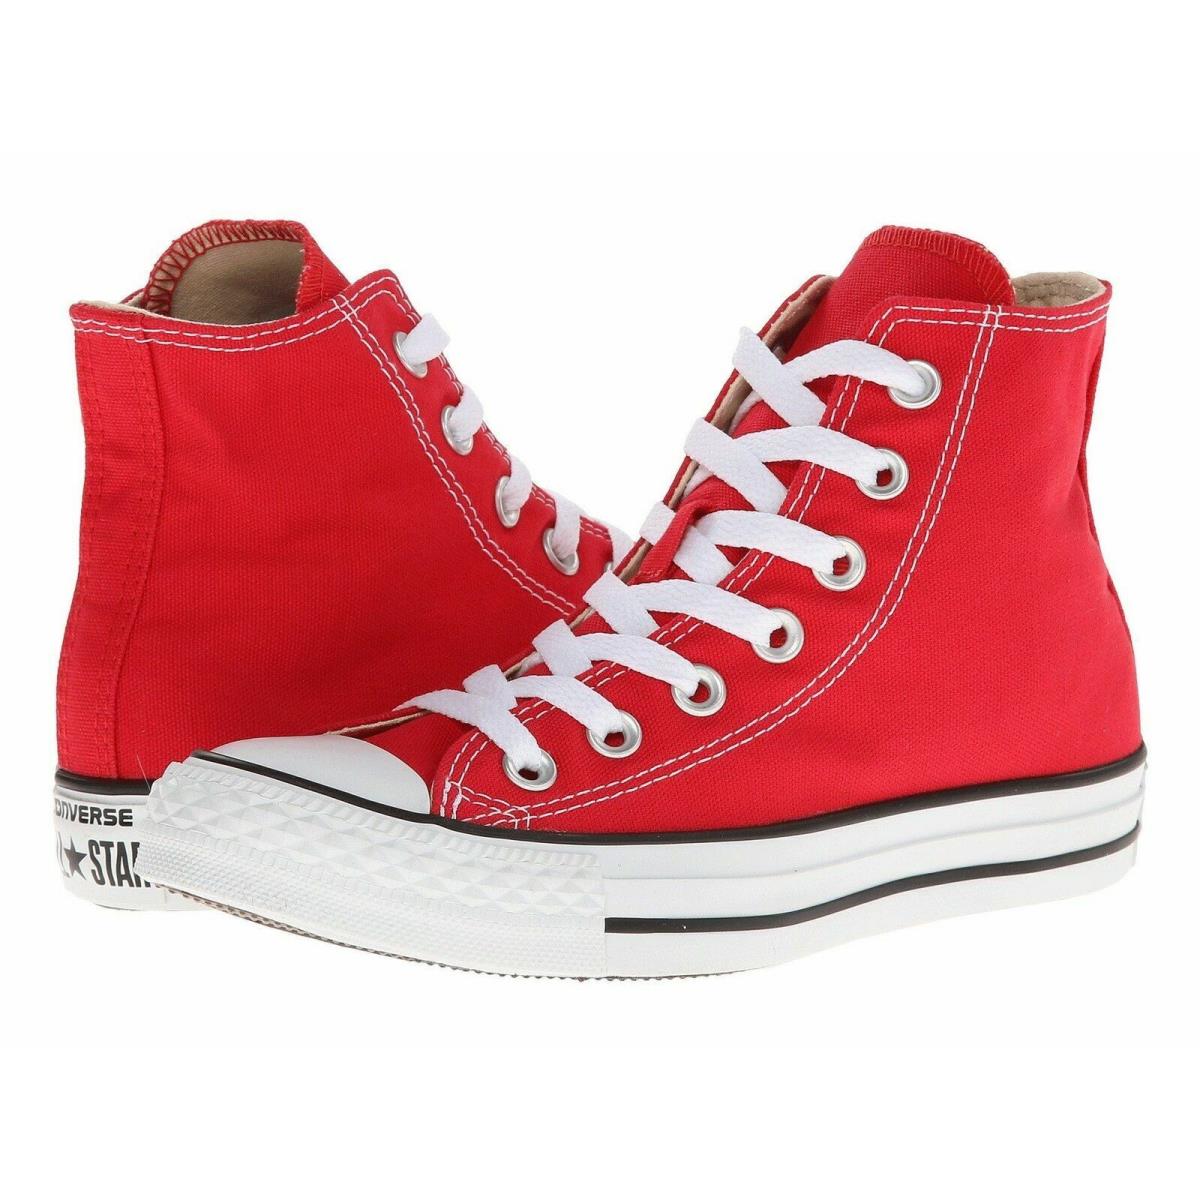 Converse All Star Chuck Taylor Hi Top Red Canvas Men`s Women`s Shoes M9621$$$ - Red